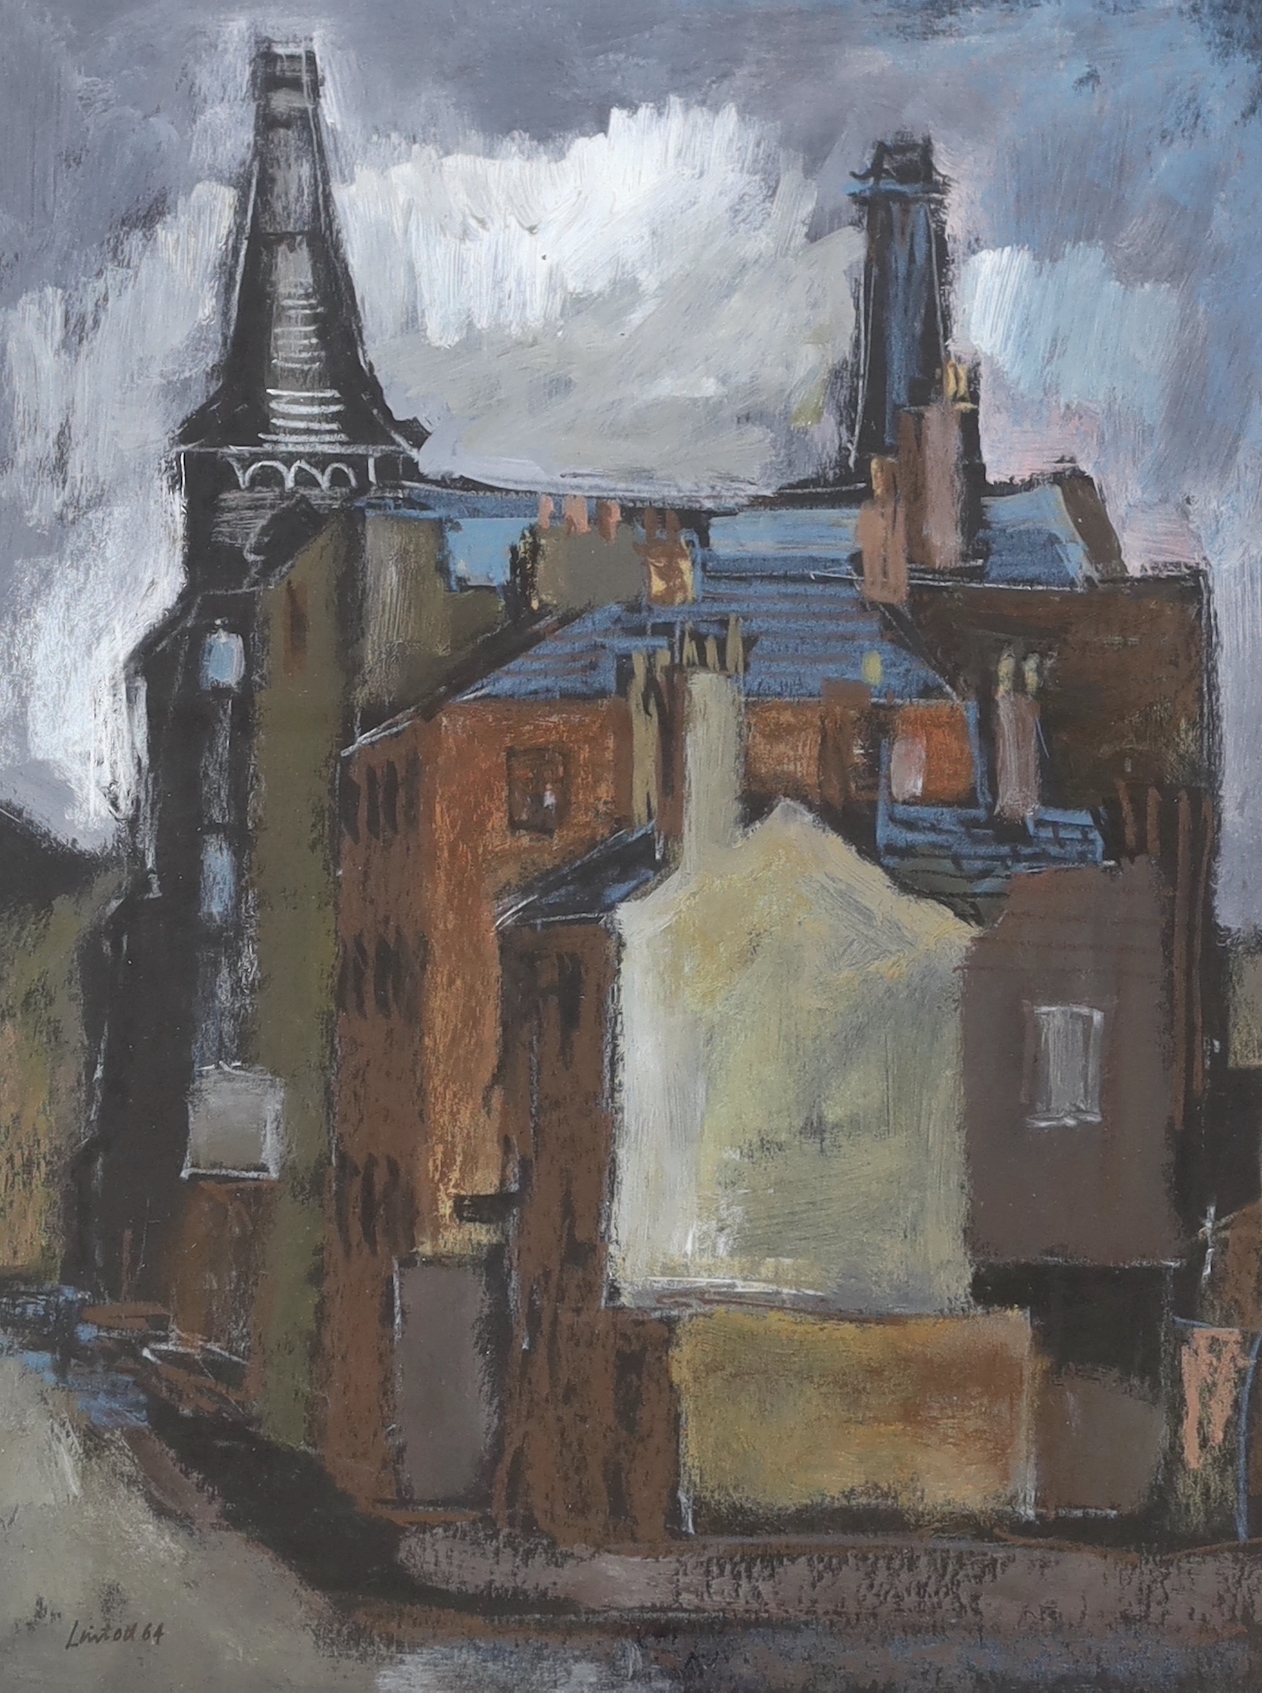 Geoffrey Lintott (20th century), mixed media, 'Industrial buildings, Manchester', signed and dated ‘64, 39 x 29cm